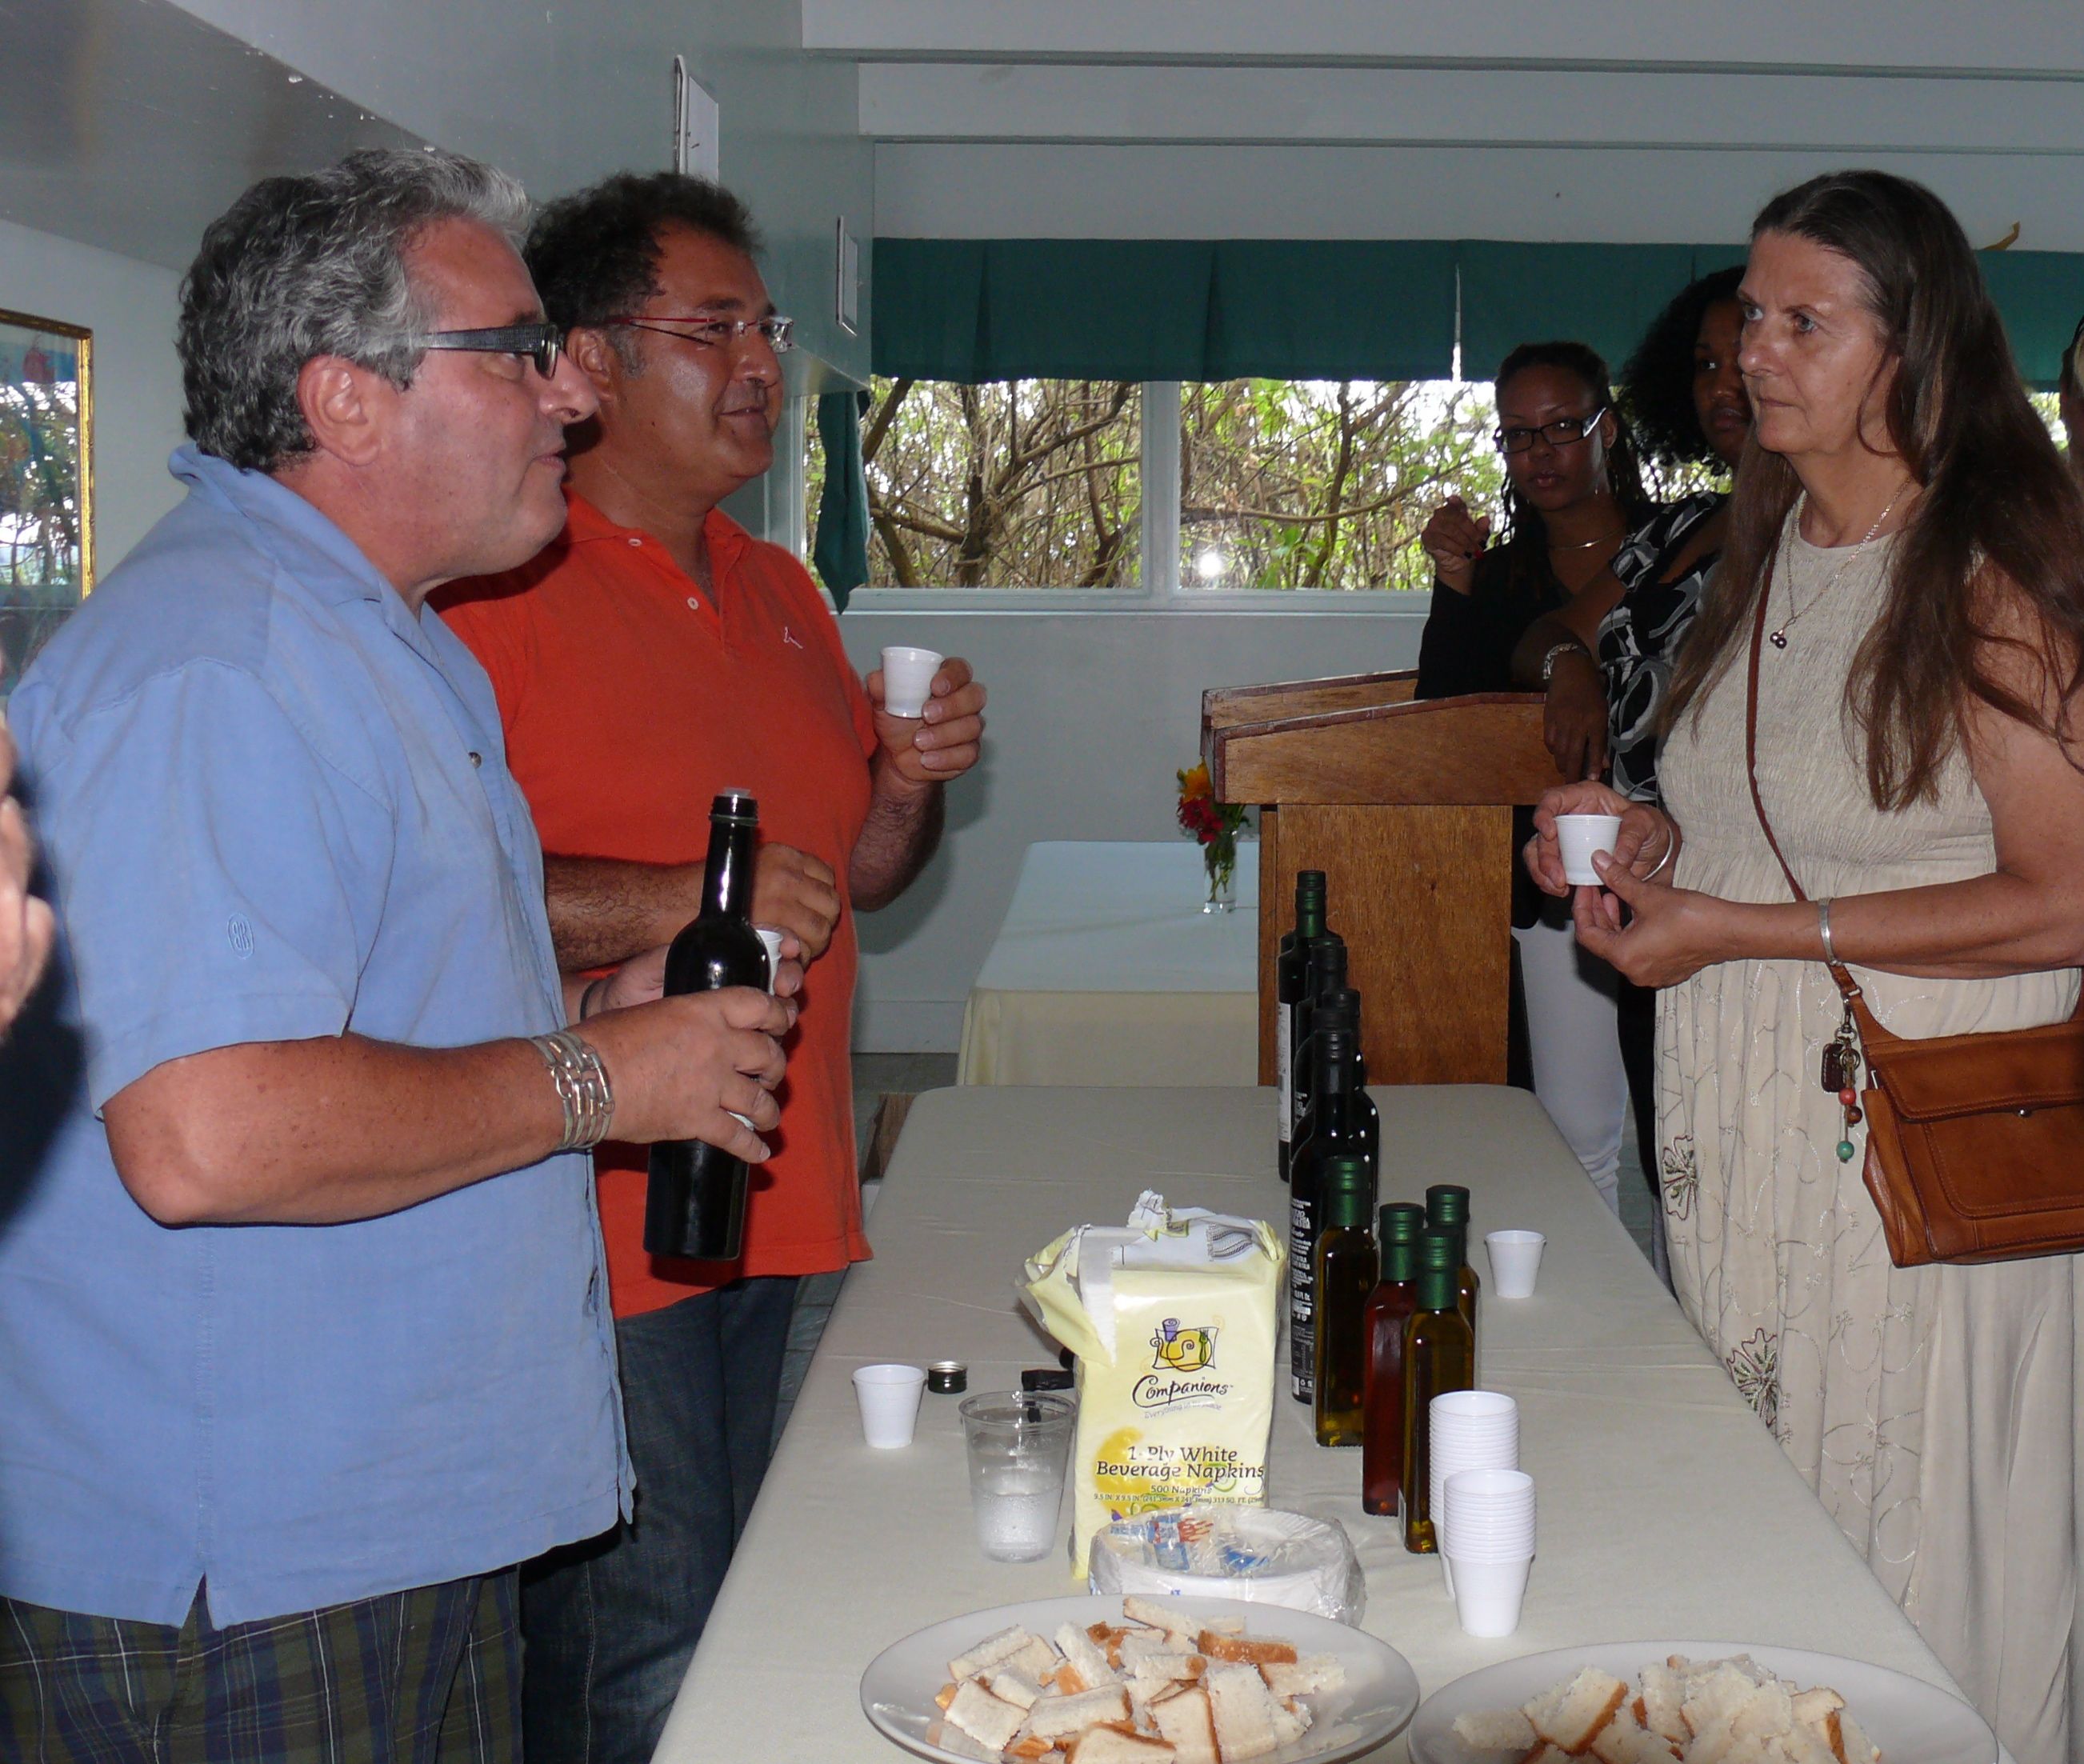 Massimiliano Montecchia of the Frantoio Montecchia olive oil company (orange shirt) offers a taste of one of his olive oils, while Pietro Bartocci (blue shirt) talks about the oil's characteristics at Wednesday's St. Croix Food and Wine Experience seminar.